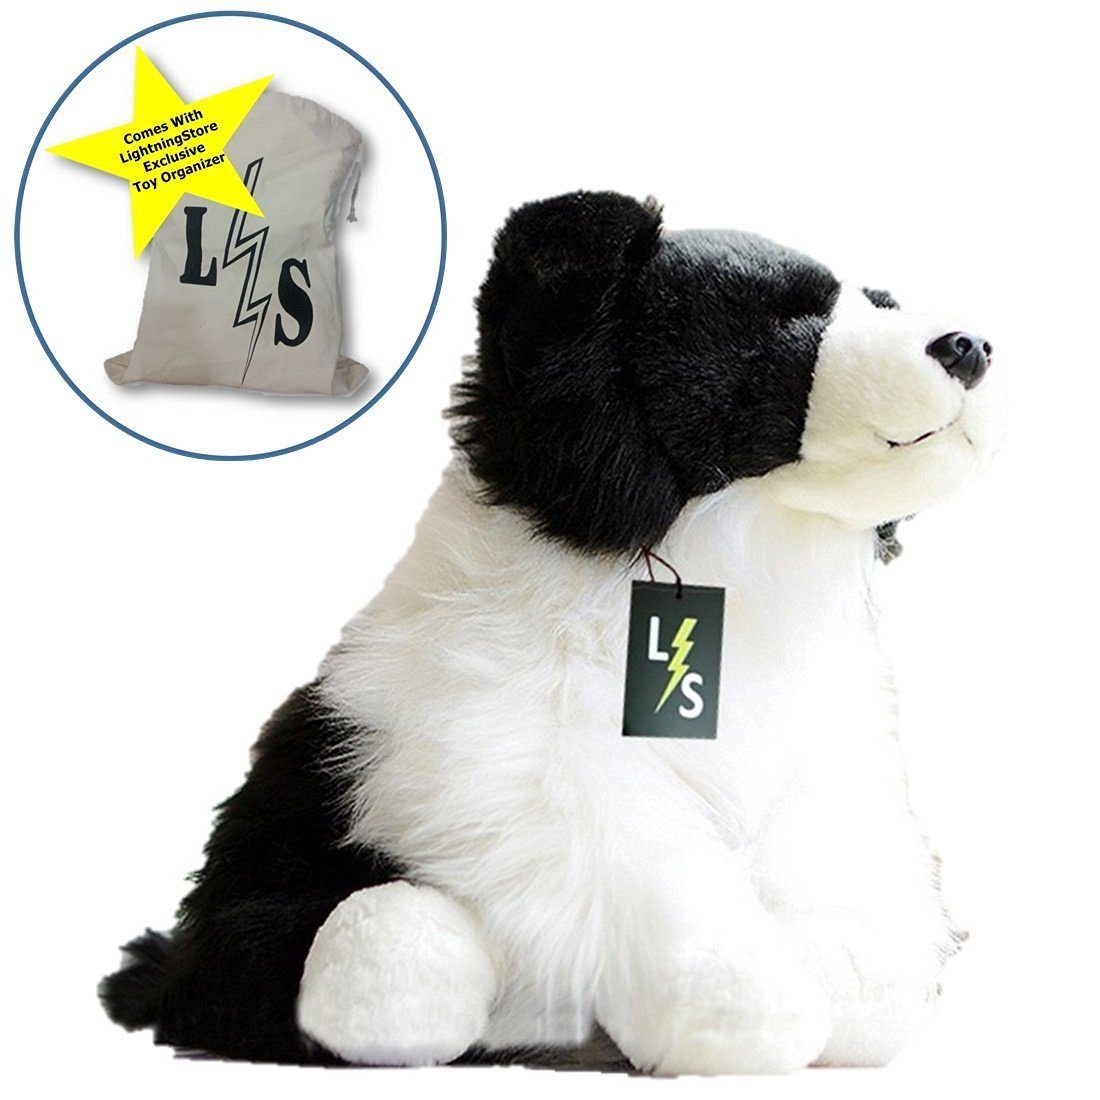 LightningStore Adorable Cute Black and White Border Collie Puppy Dog D